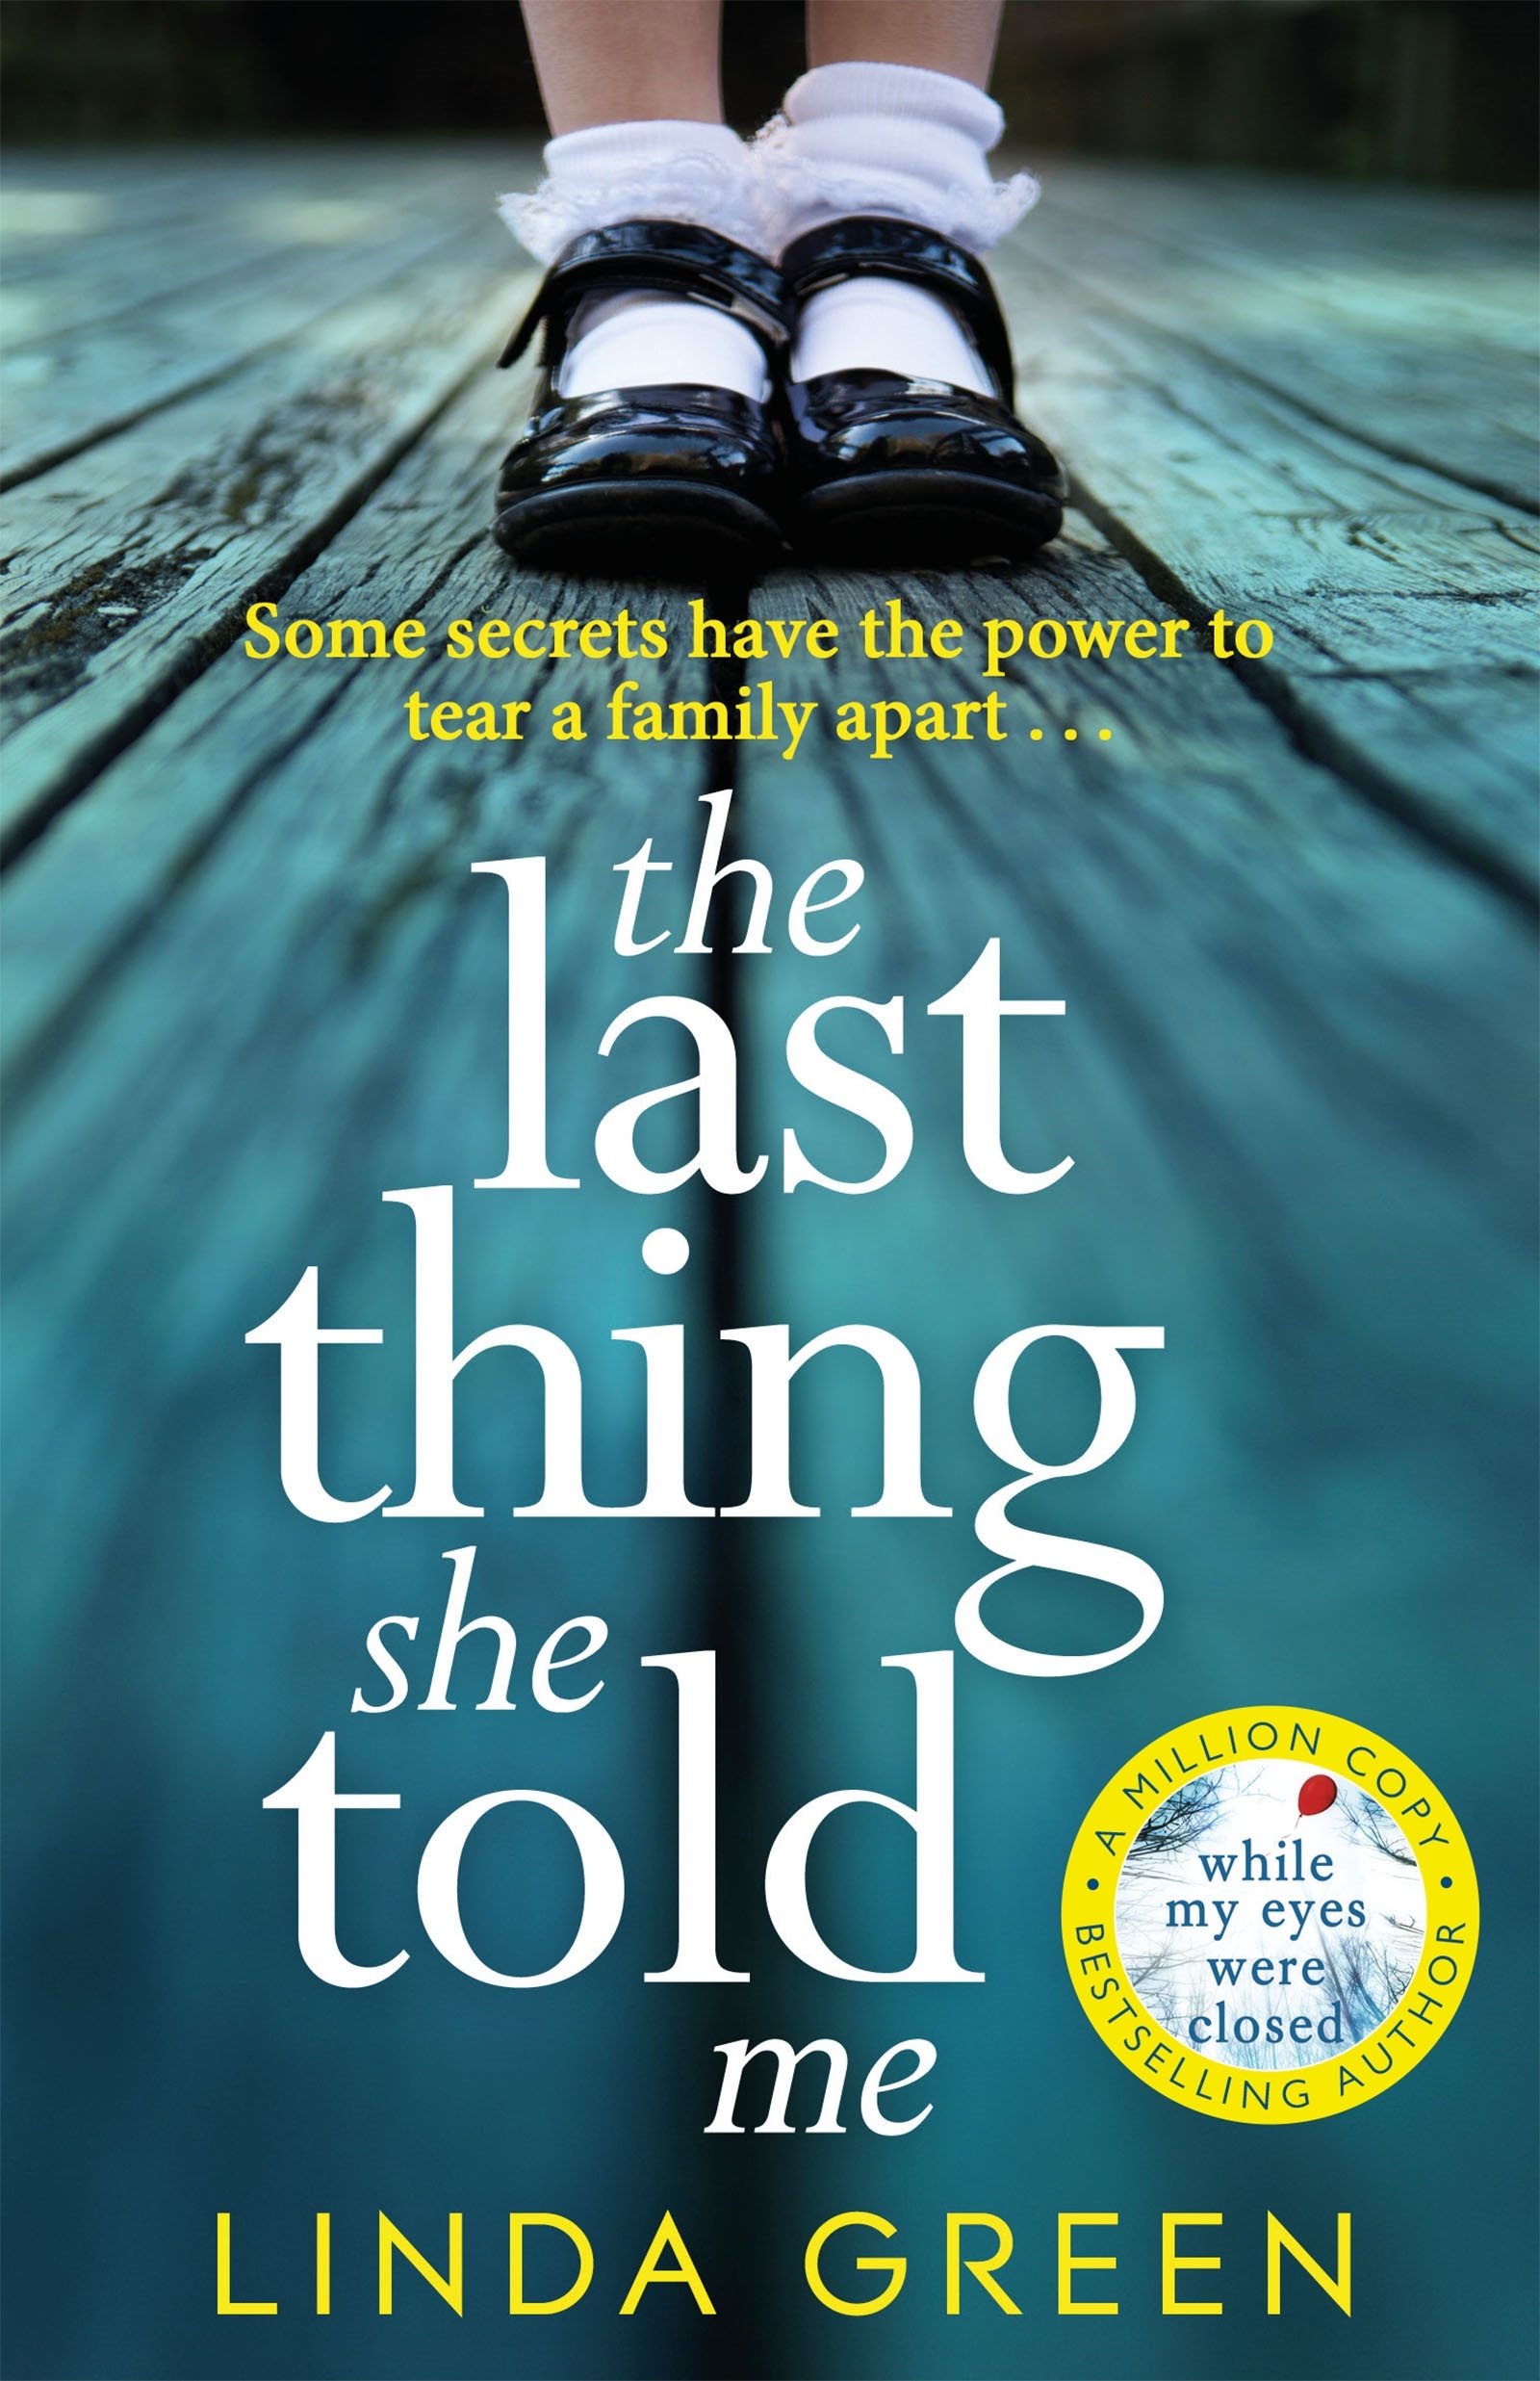 Book “The Last Thing She Told Me” by Linda Green — March 7, 2019